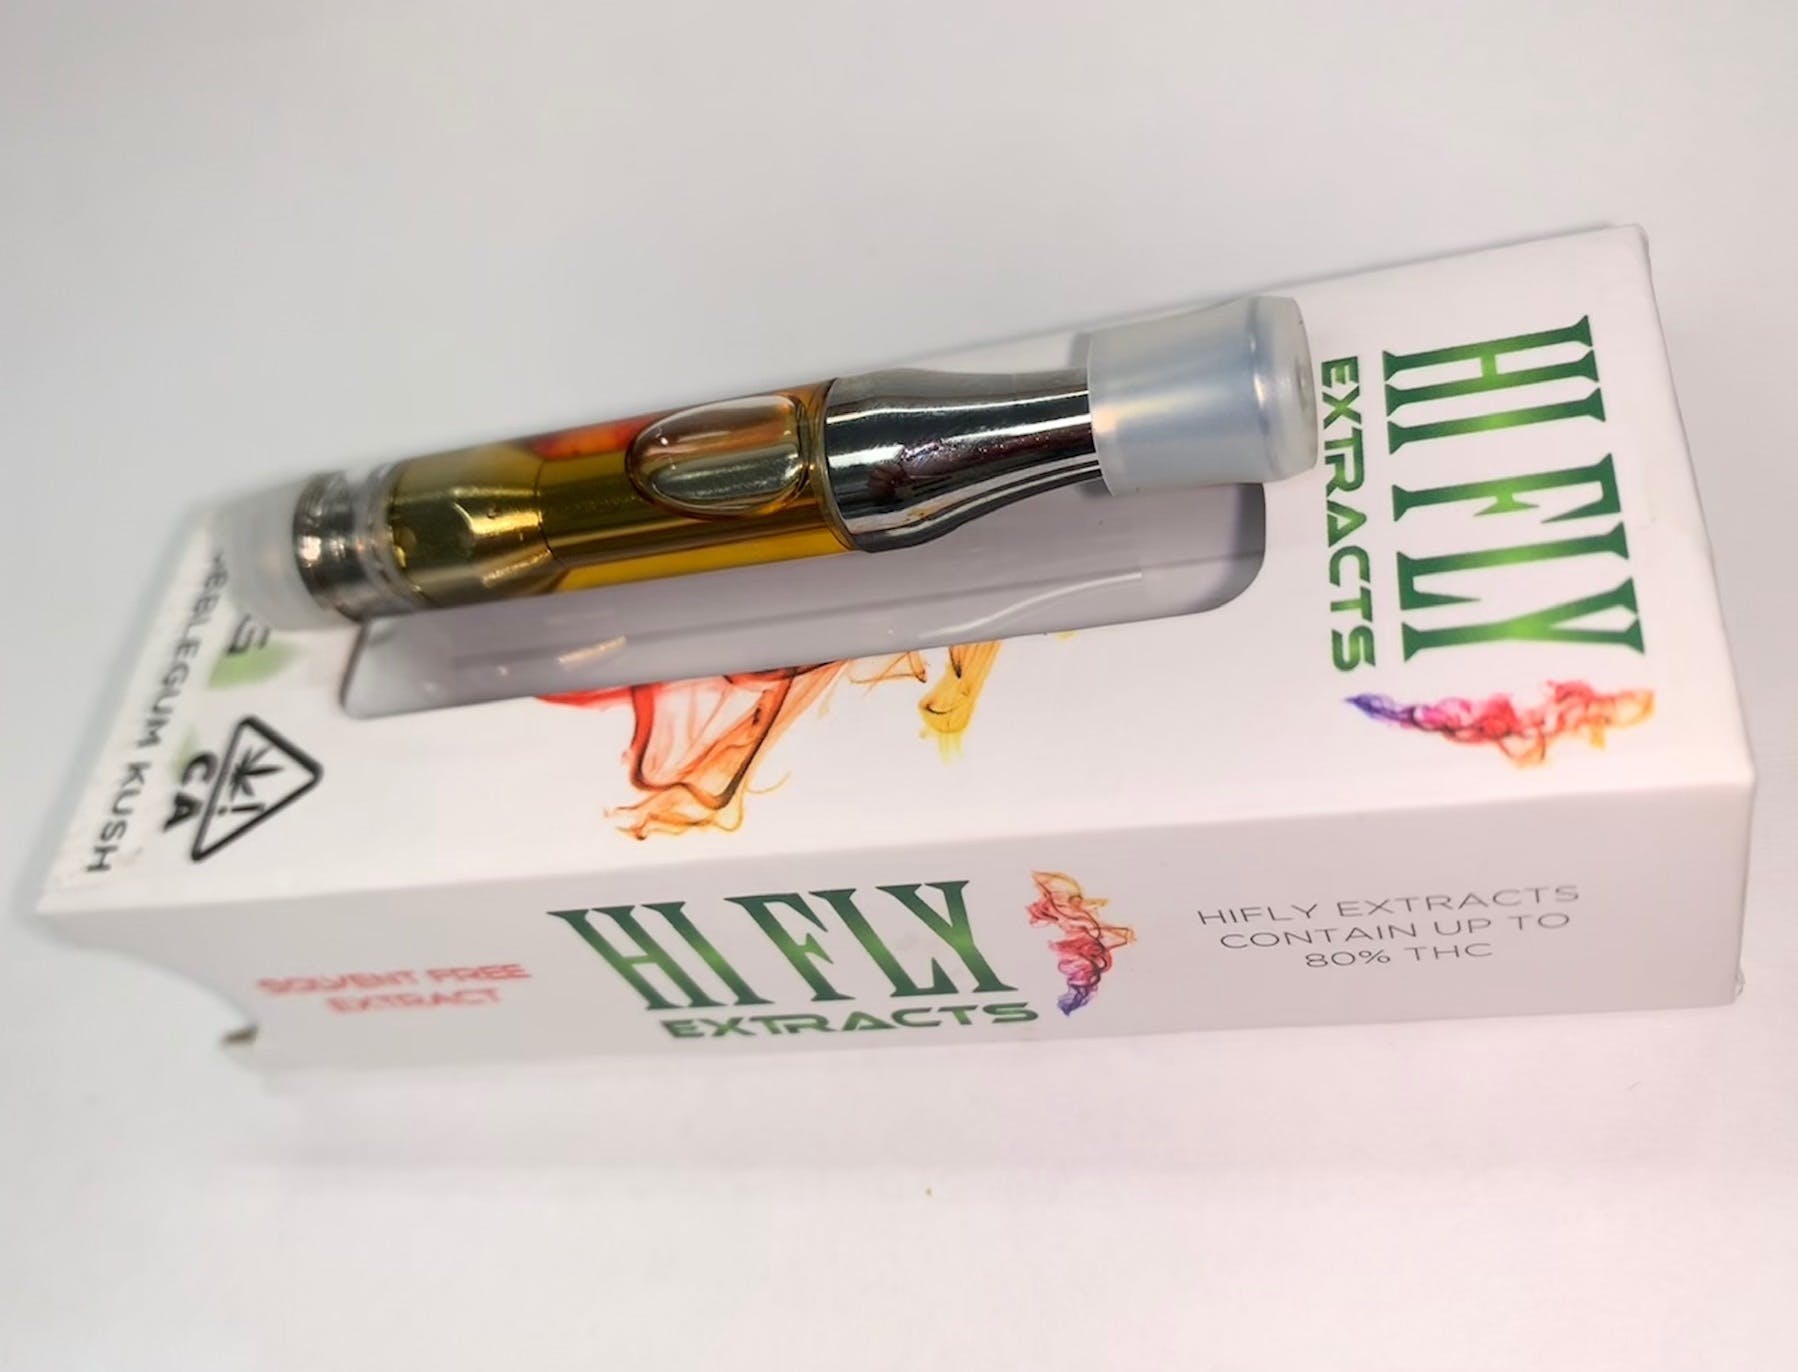 concentrate-hifly-1g-cartridge-2for-2460-or-3for-2490